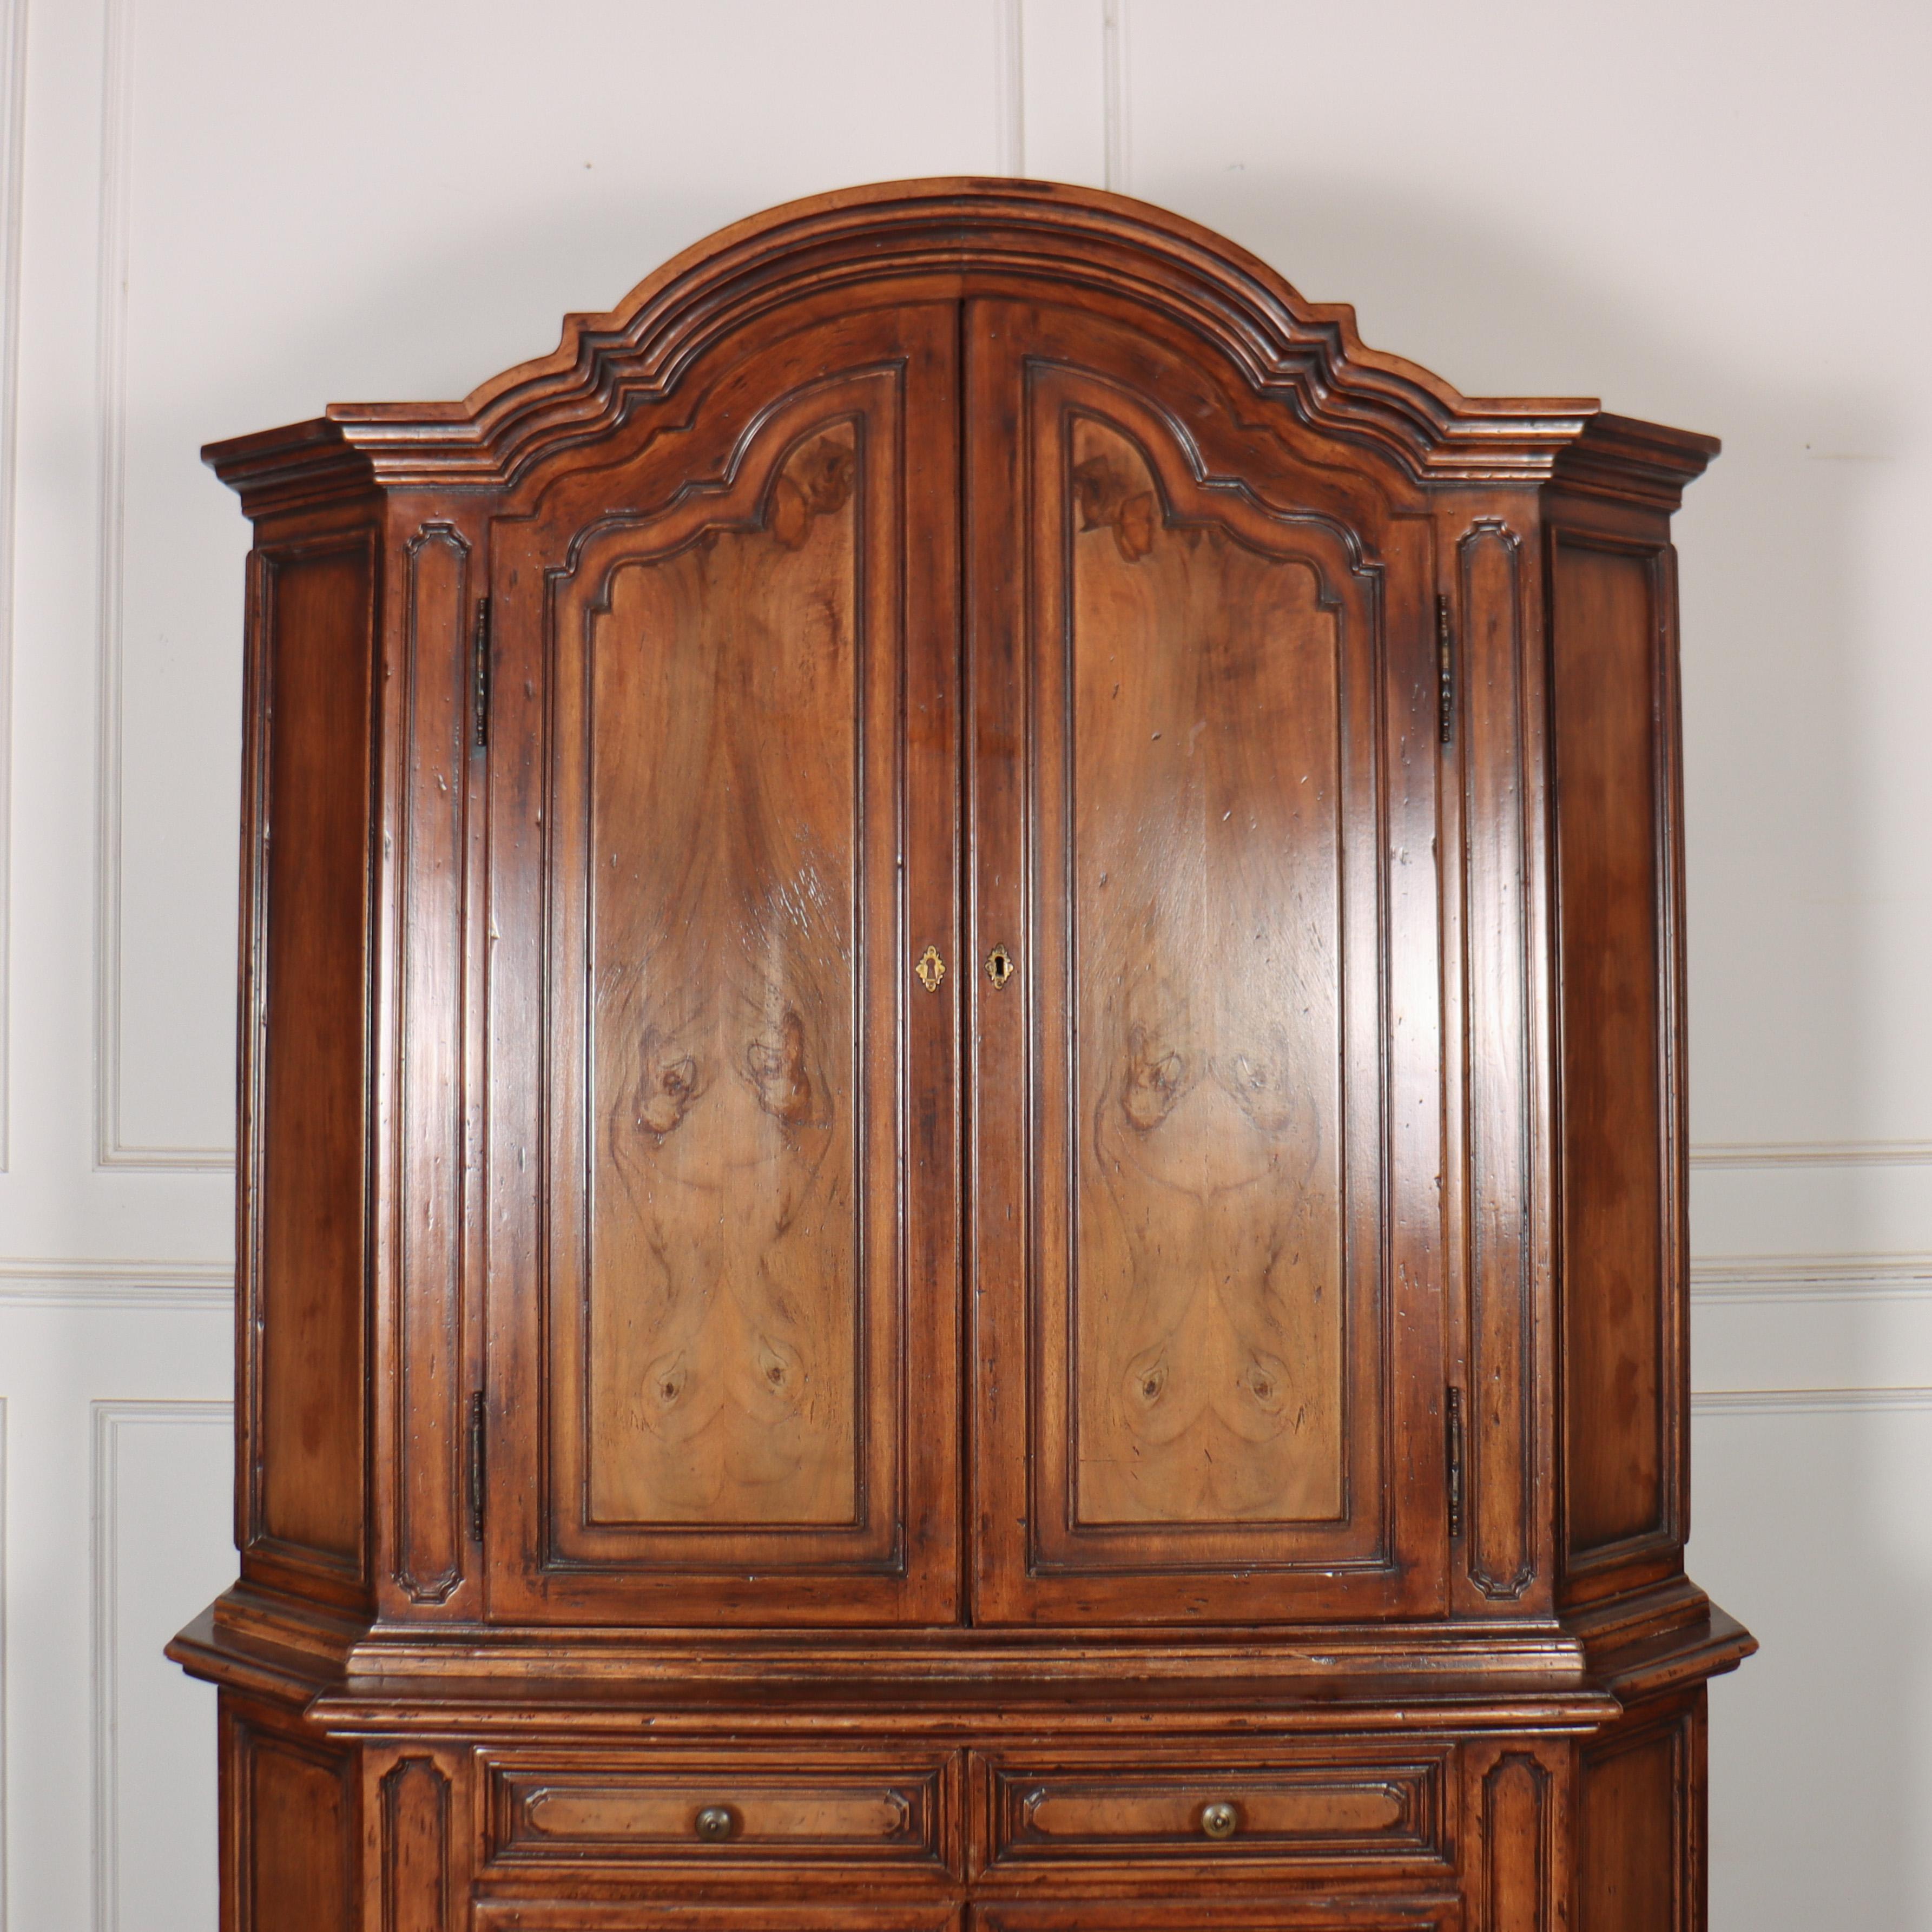 Early 20th C Italian walnut 4 door / 2 drawer cupboard. Fabric interior can be removed if needed. 1920.

Reference: 8142

Dimensions
58.5 inches (149 cms) Wide
21 inches (53 cms) Deep
88.5 inches (225 cms) High